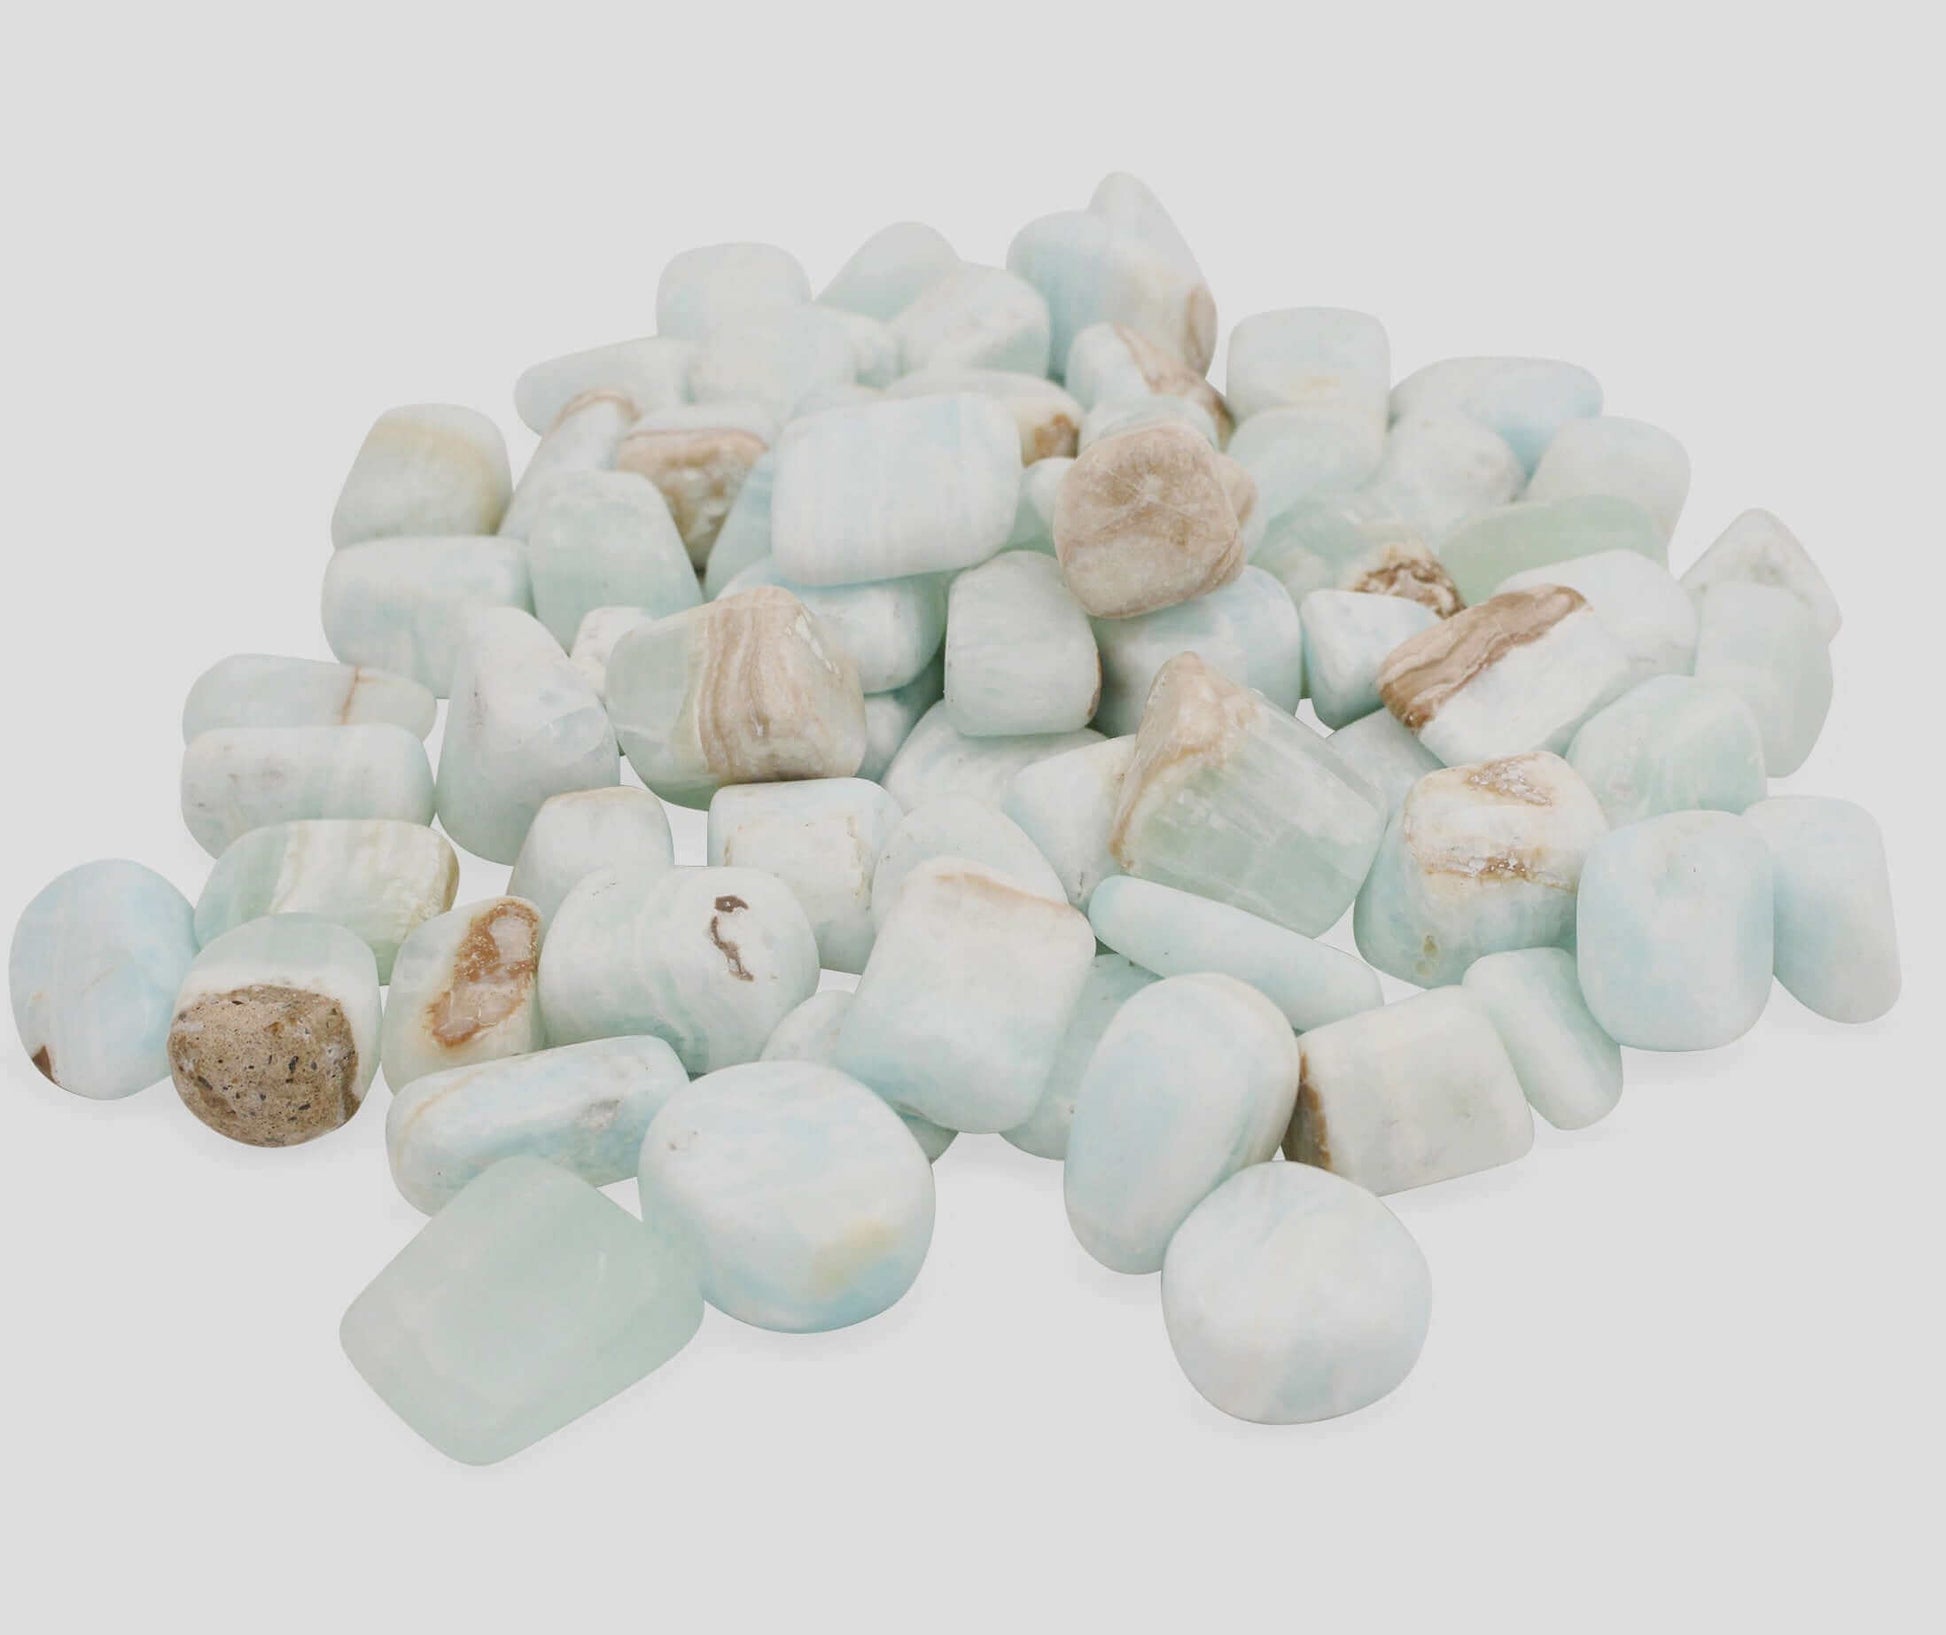 Calcite Caribbean Blue Tumbled at $7 only from Spiral Rain